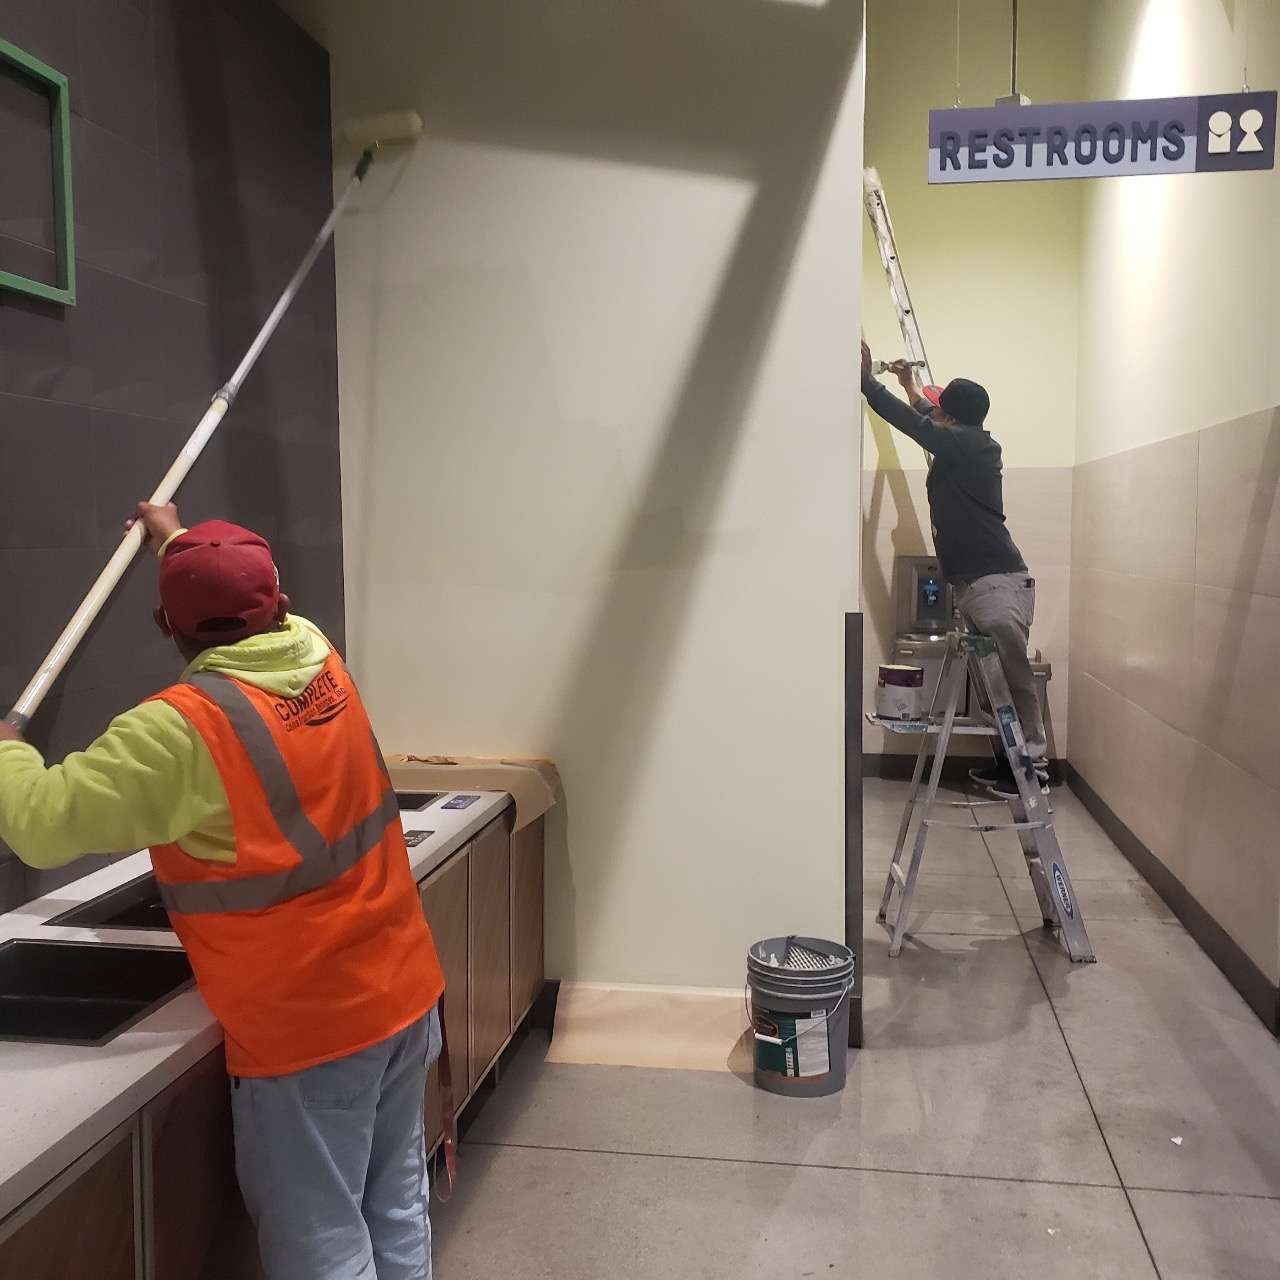 people remodeling a commercial restroom